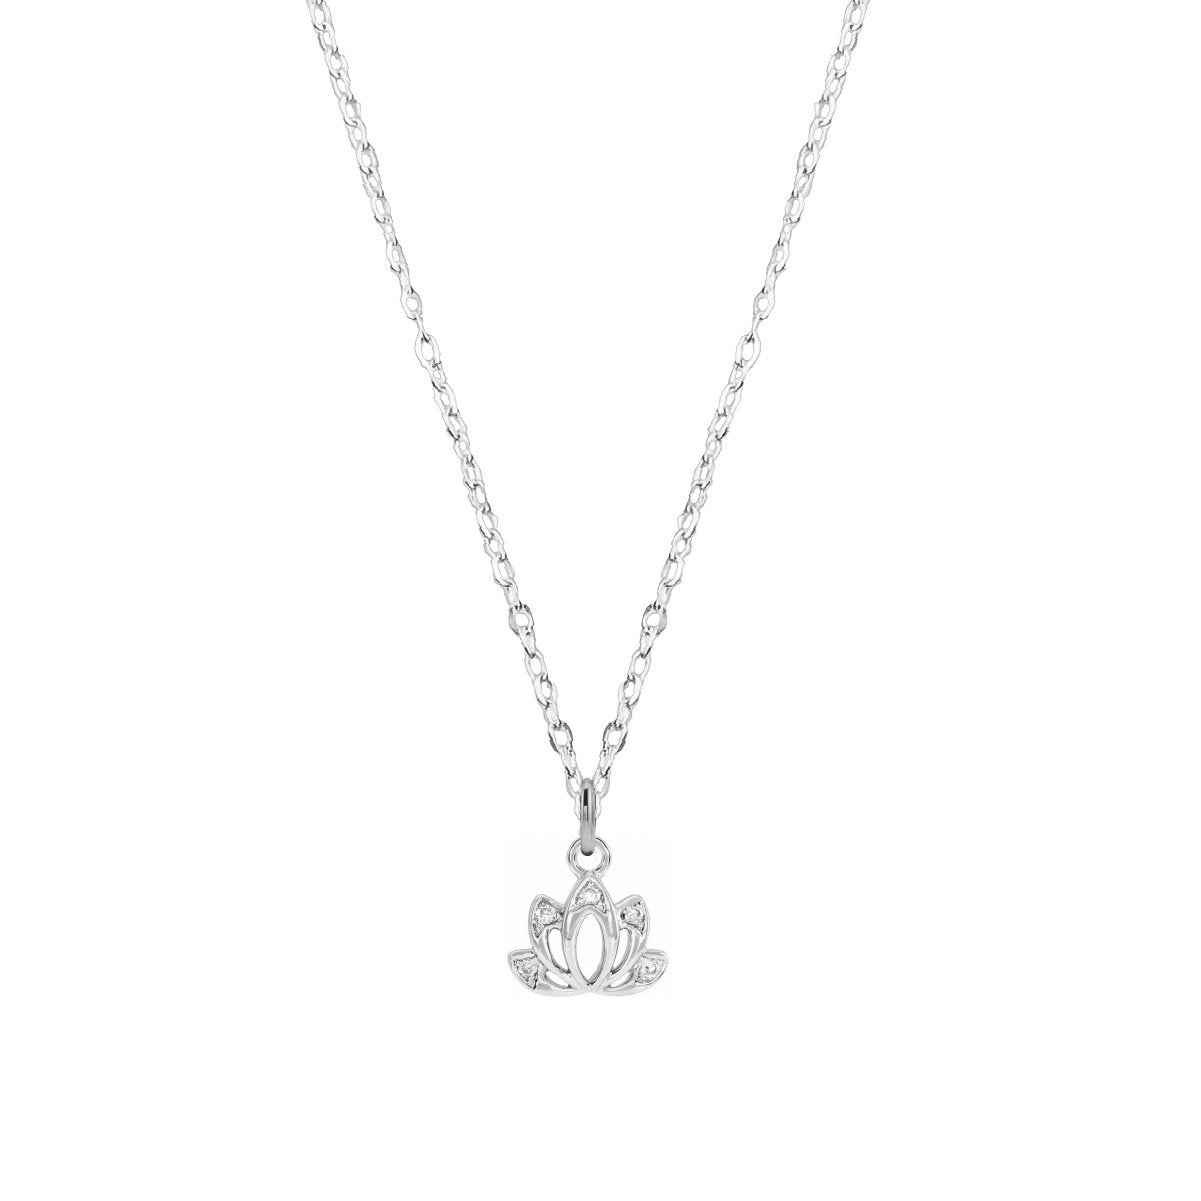 Tiny Lotus Diamond Necklace Necklace Robyn Canady 14K White Gold 16" Chain 